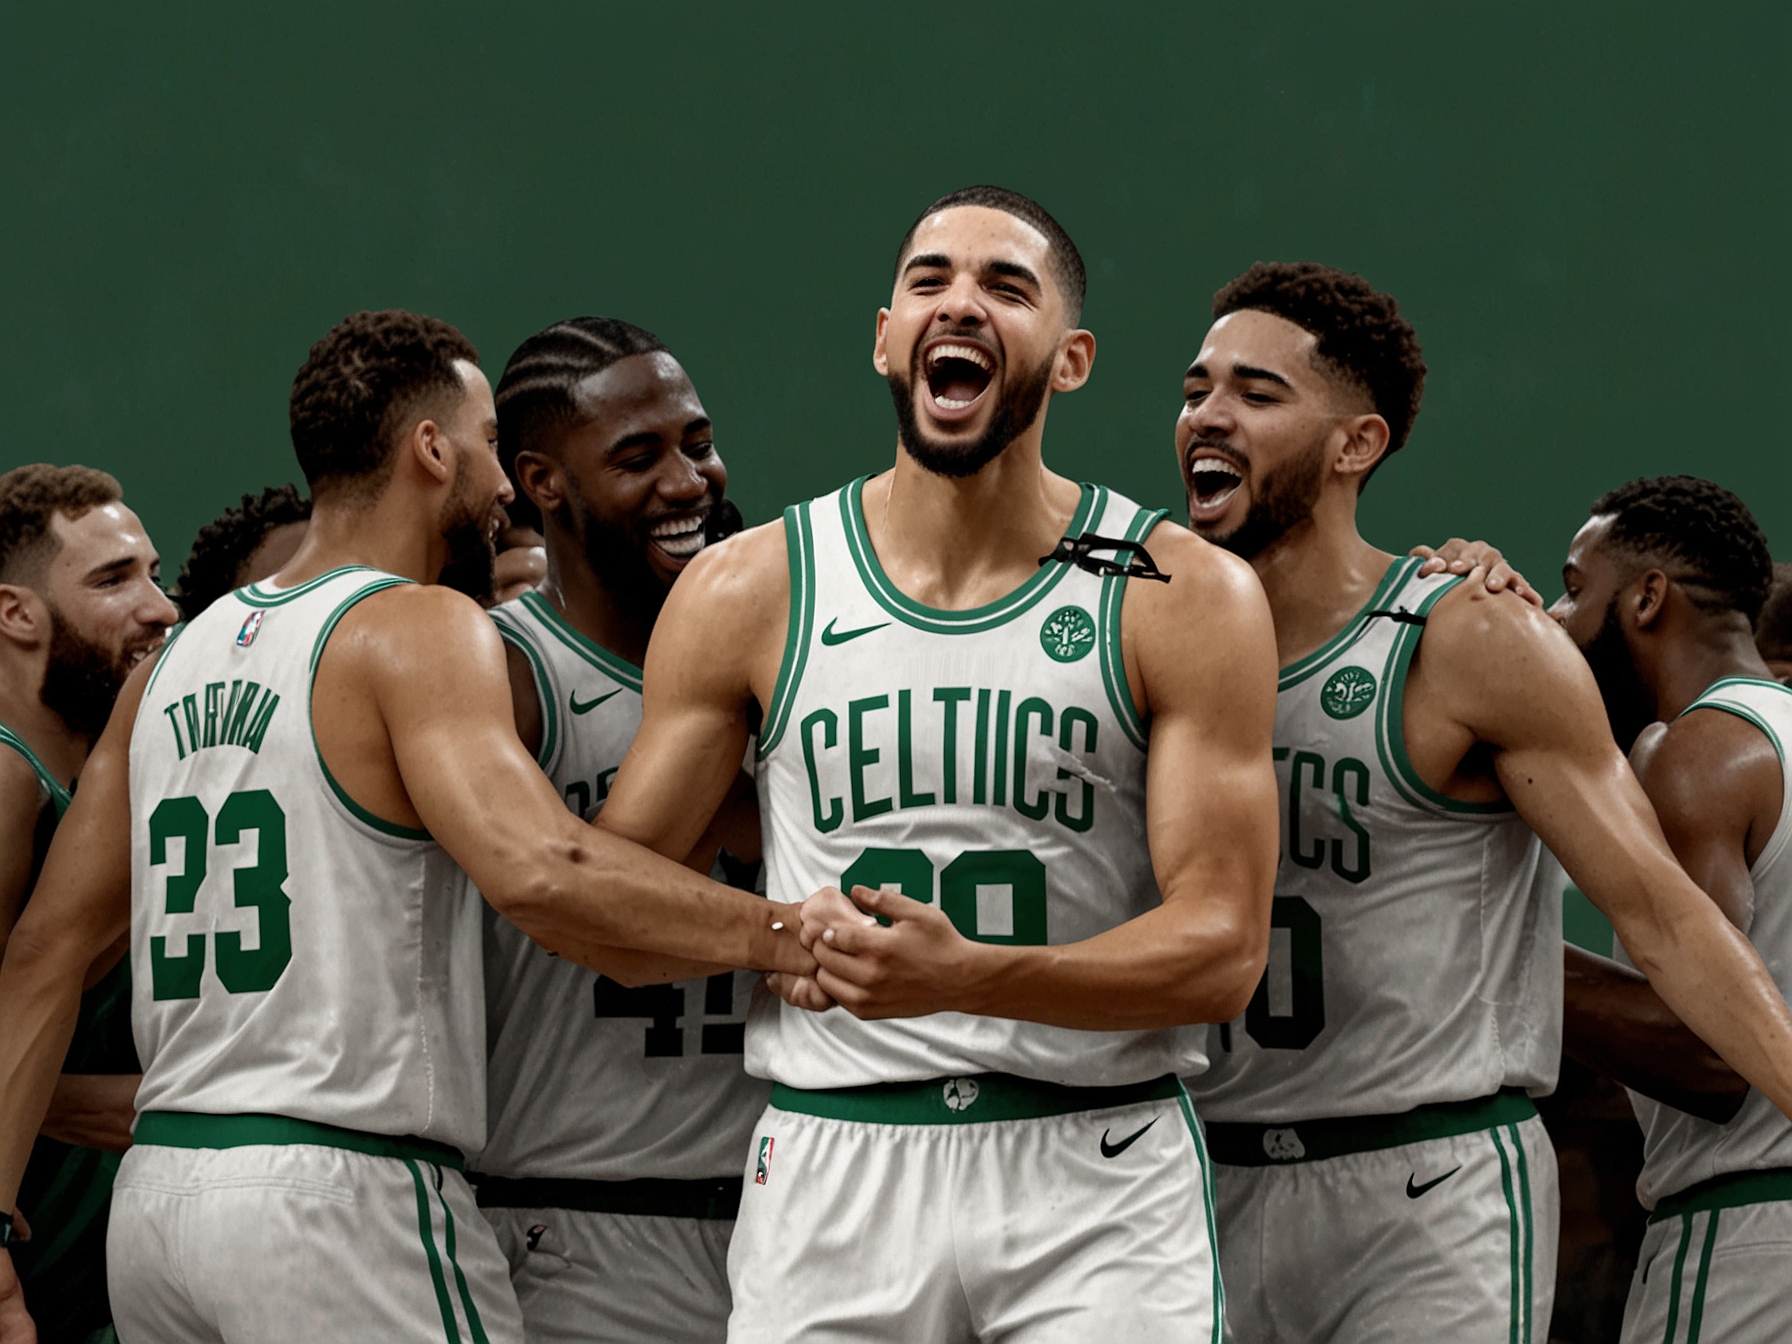 Jayson Tatum celebrates with teammates after leading the Boston Celtics to victory in Game 5 of the NBA Finals, solidifying their championship win over the Dallas Mavericks.